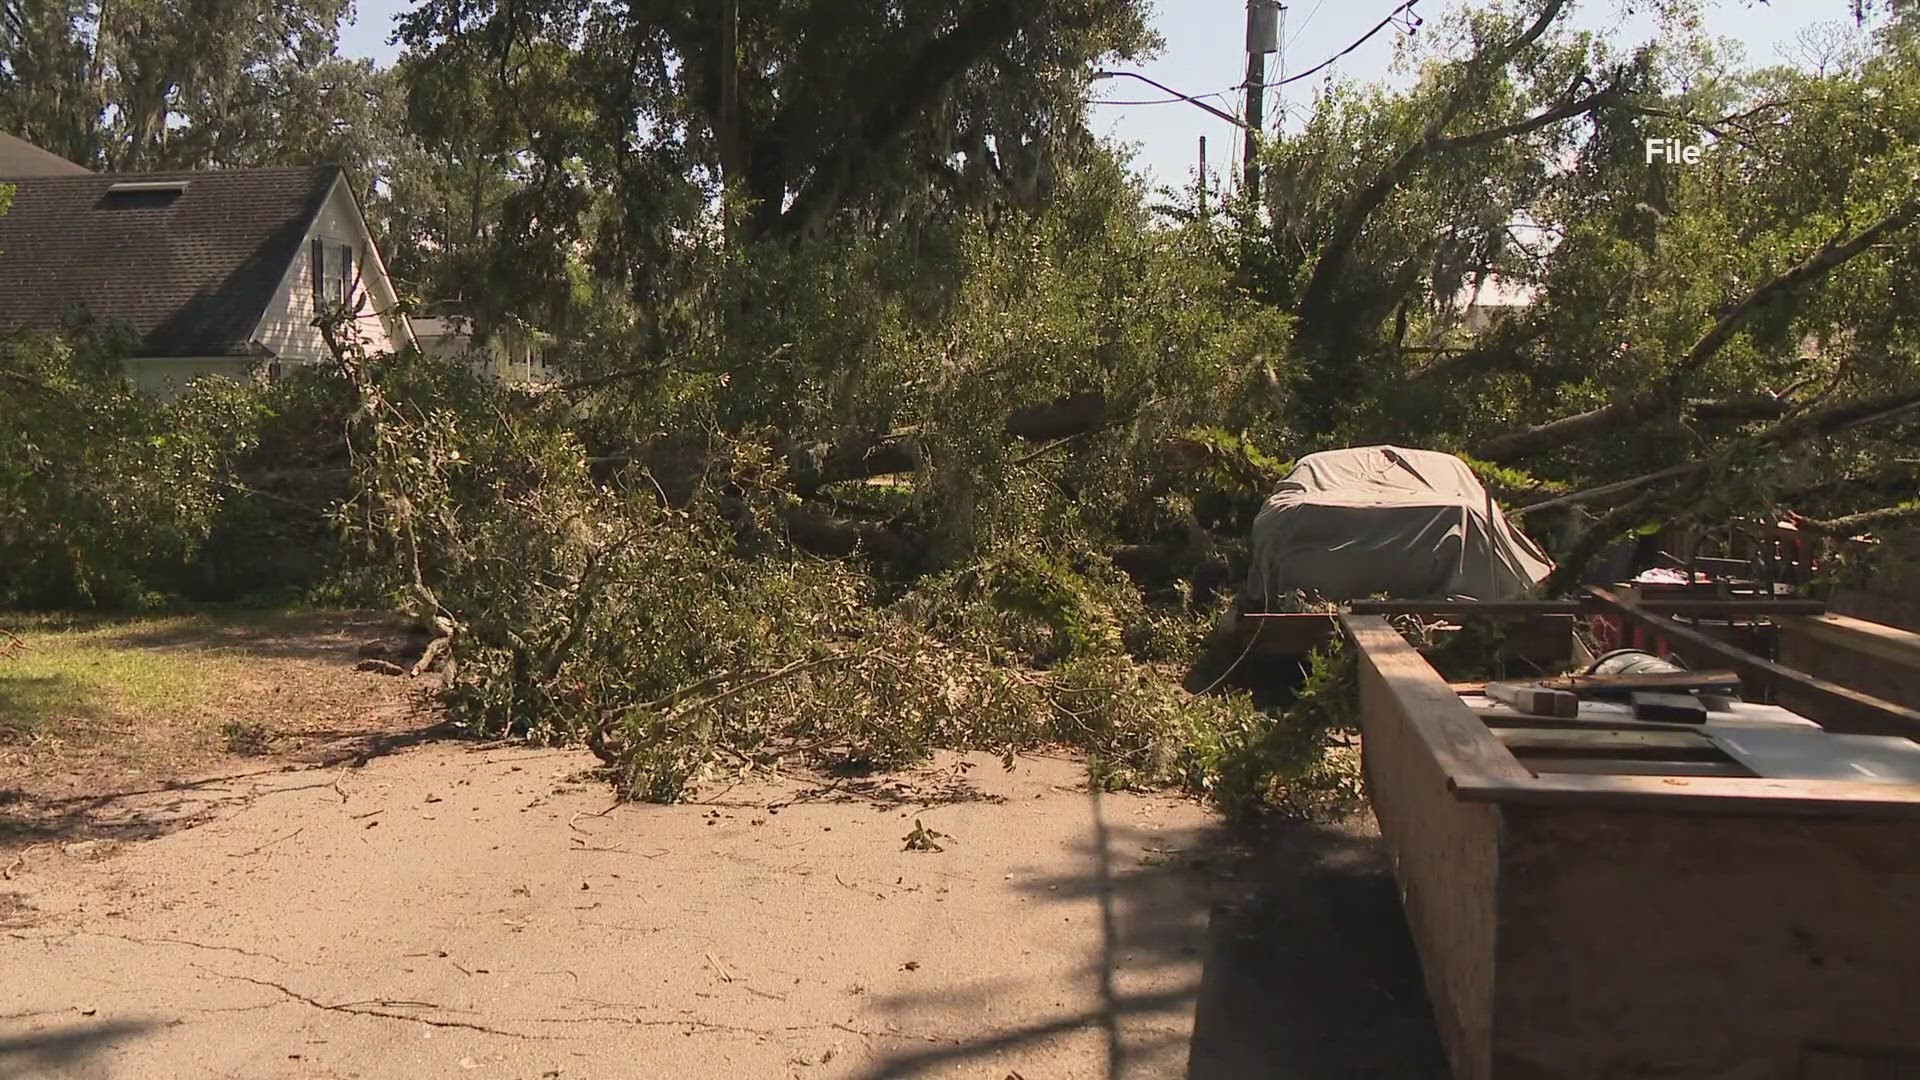 Robert Fraizer said his neighbors tree fell in his front yard, damaging his fence, car, and boat.